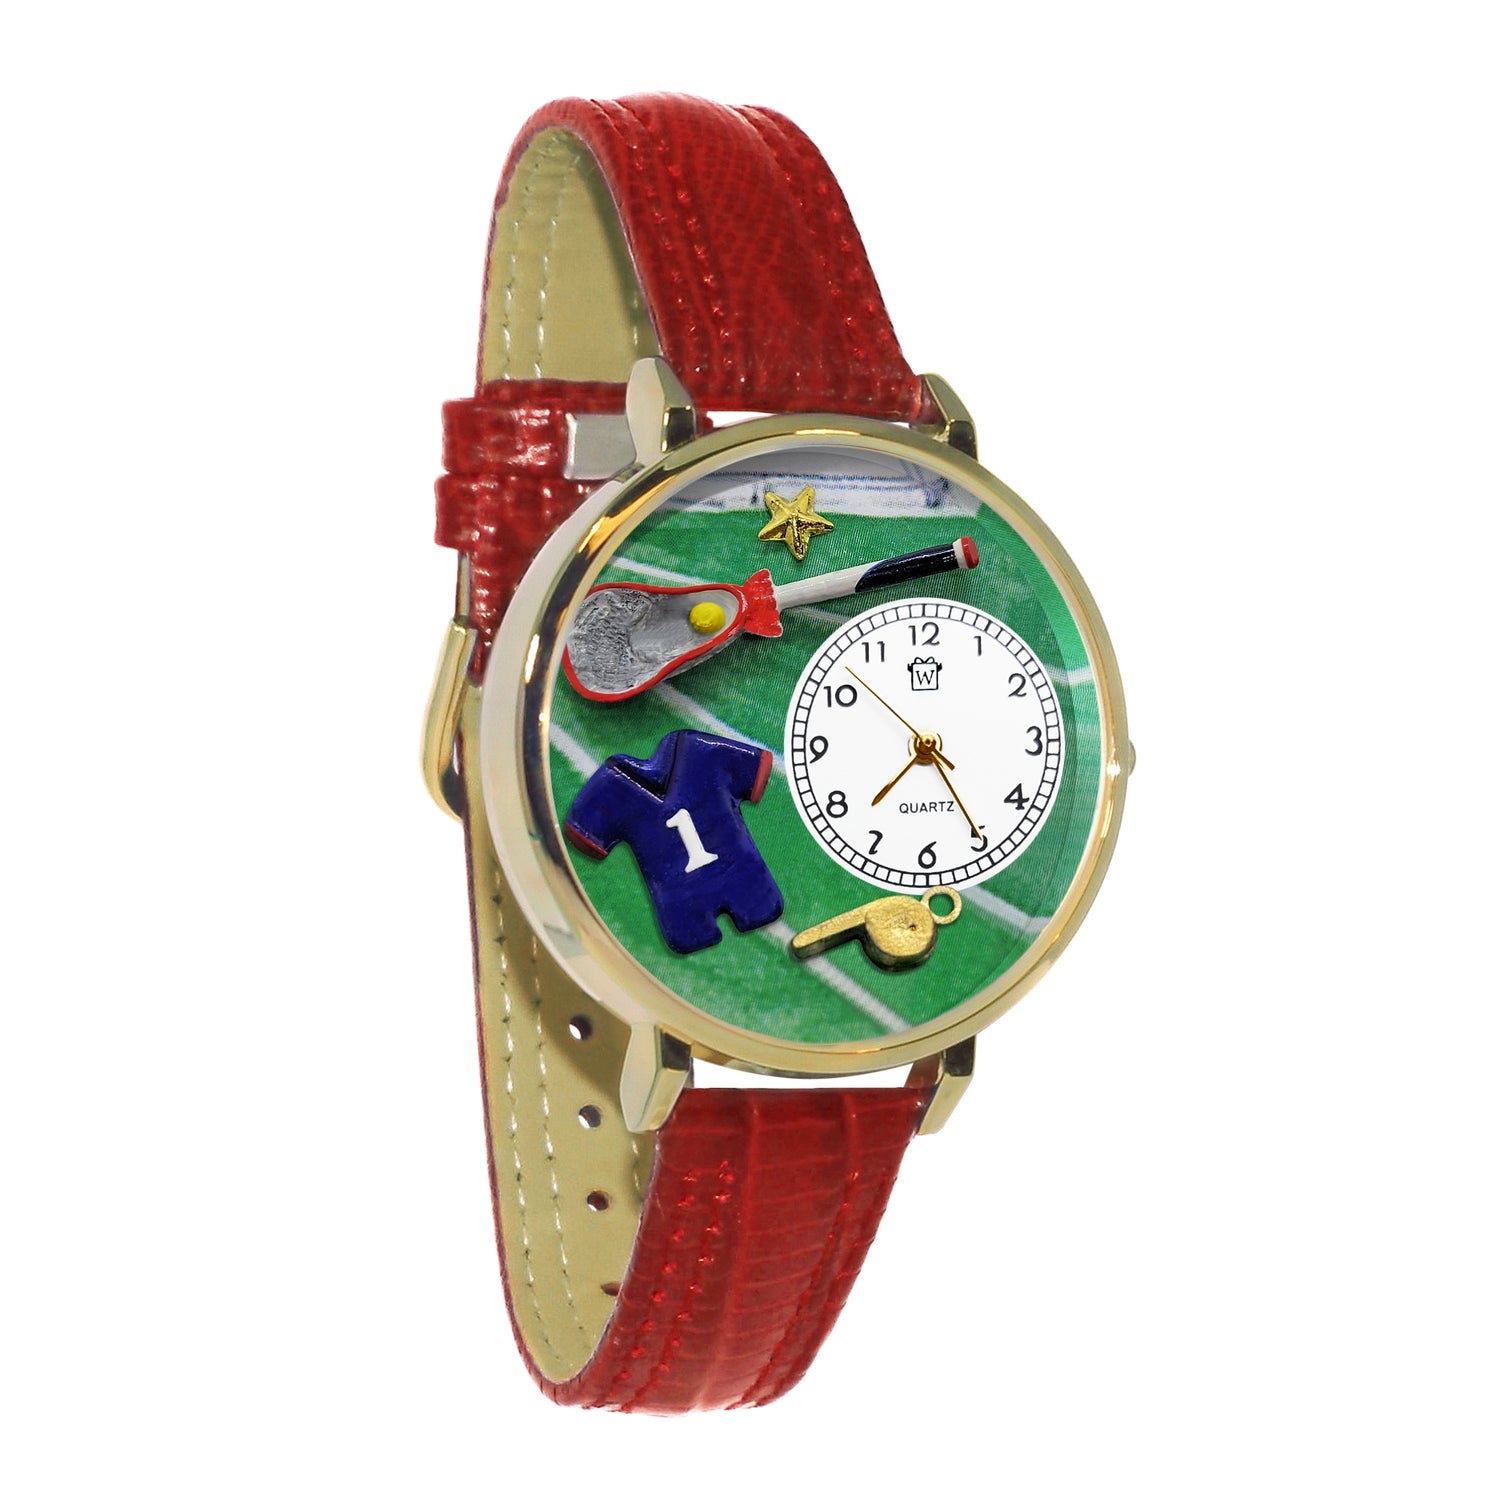 Whimsical Gifts | Lacrosse 3D Watch Large Style | Handmade in USA | Hobbies & Special Interests | Sports | Novelty Unique Fun Miniatures Gift | Gold Finish Shorts Red eather Watch Band